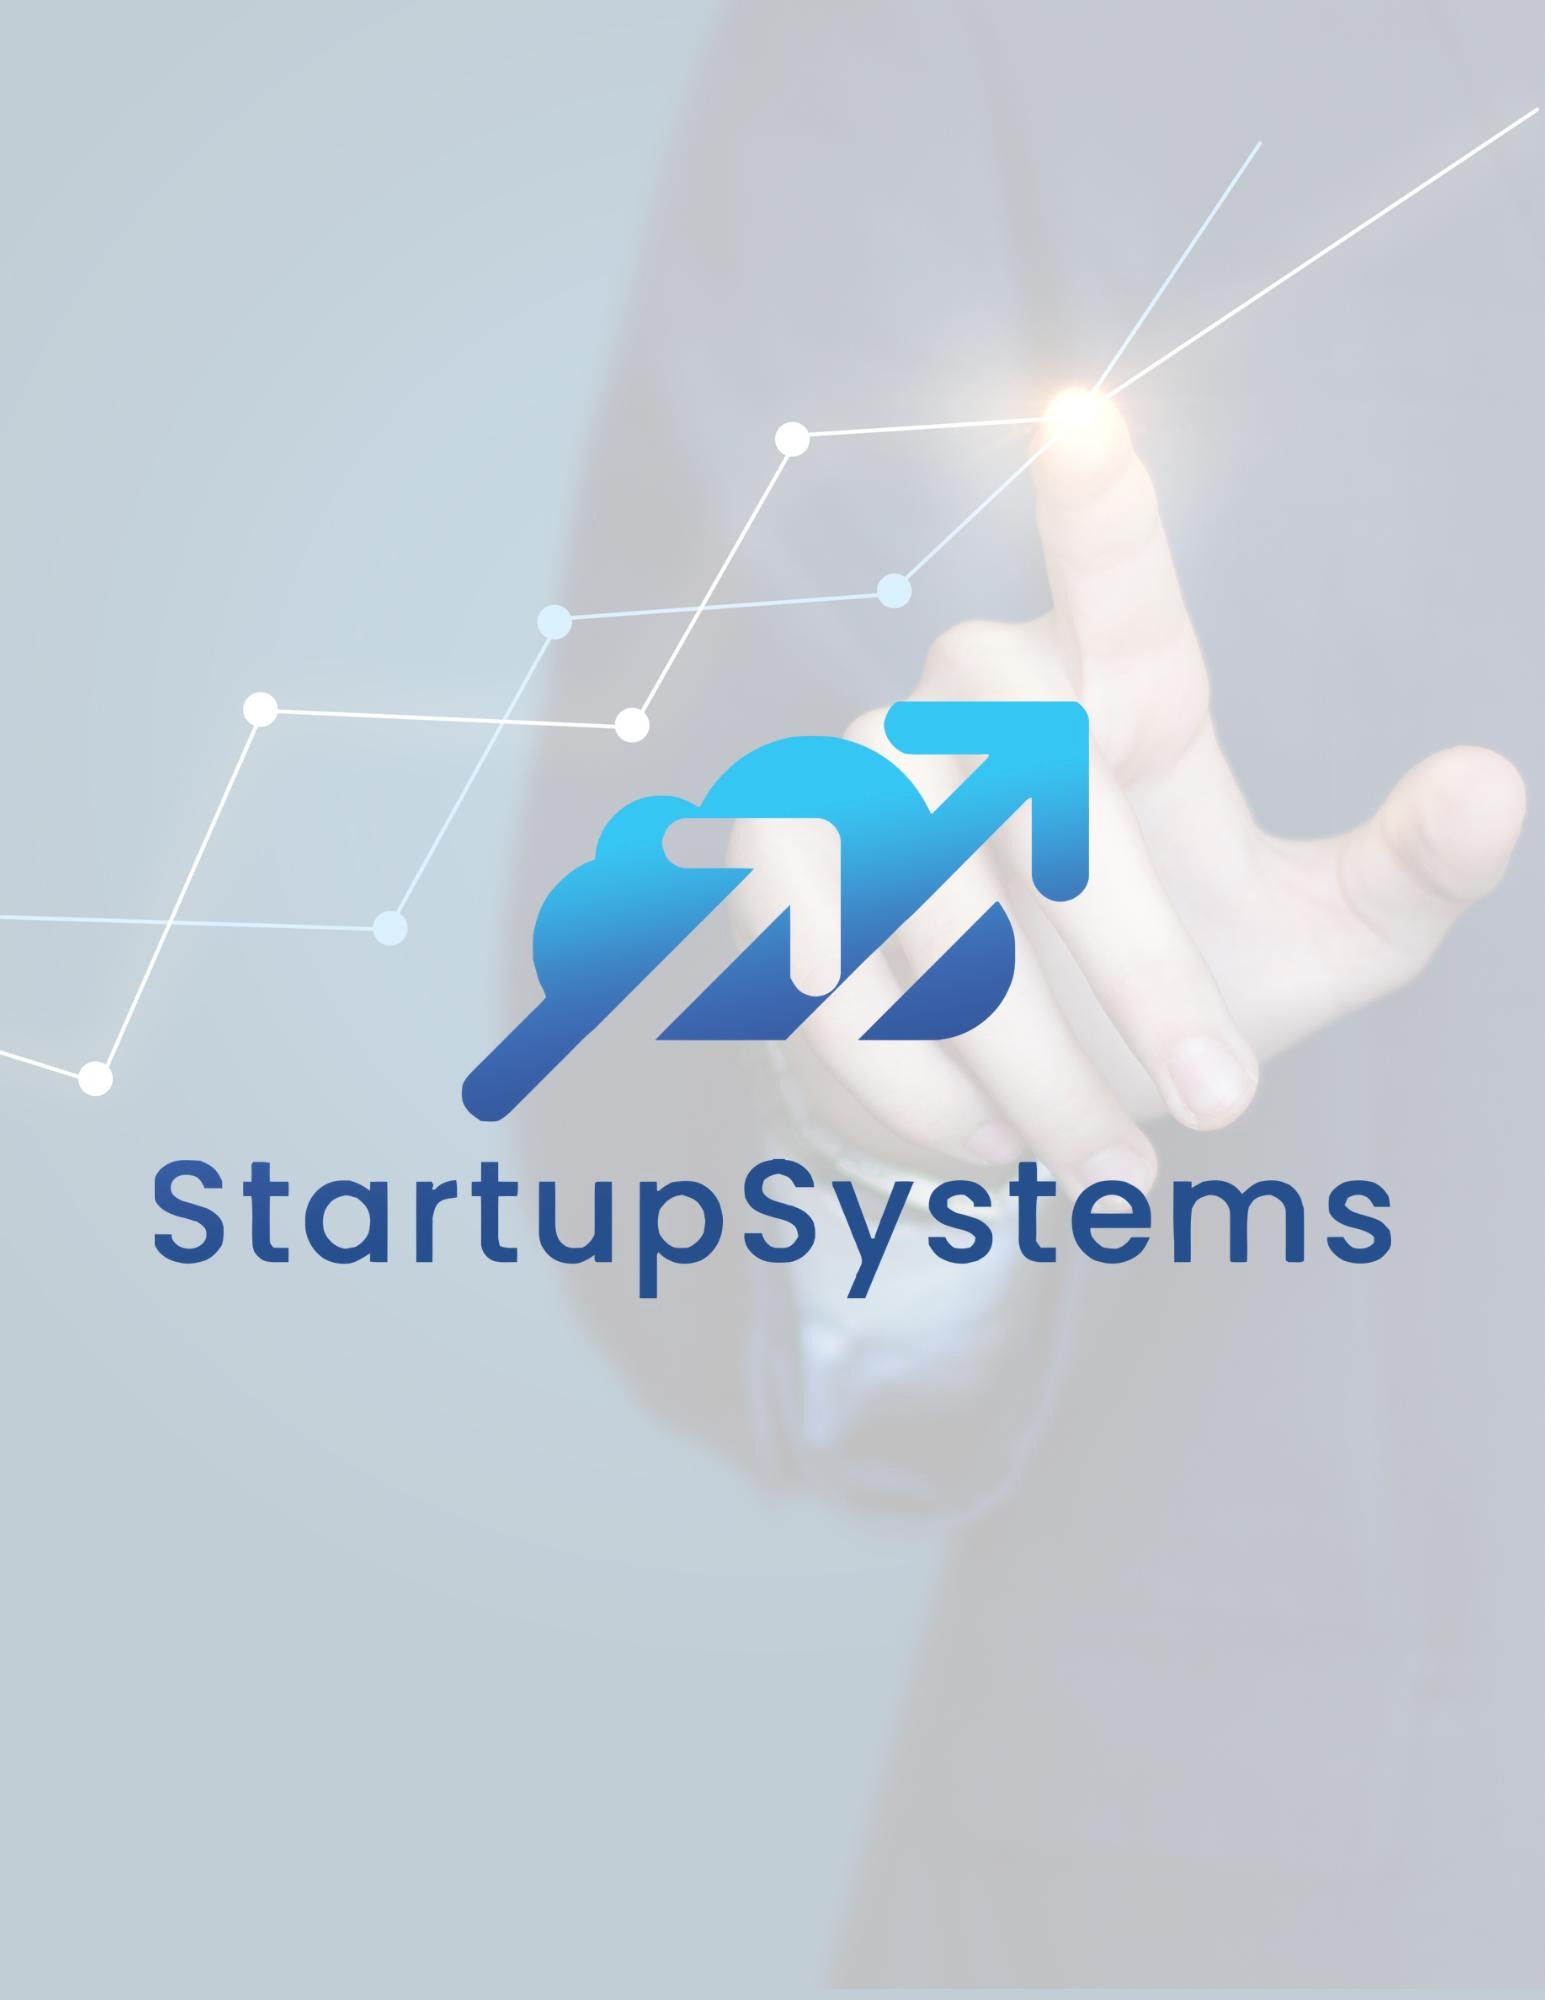 Welcome to Startup systems.net